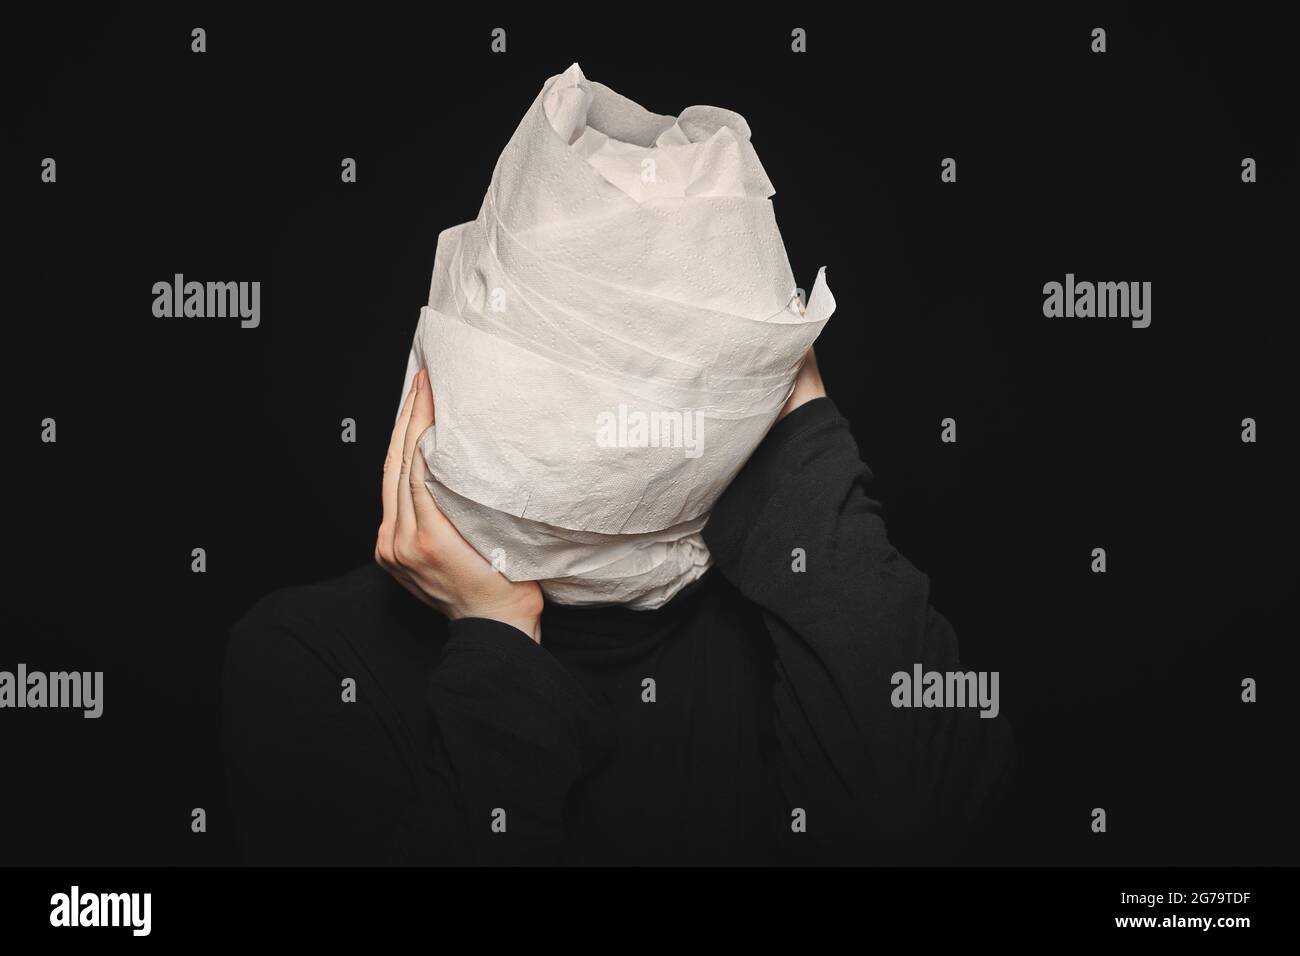 Head wrapped in toilet paper. Man holds his hands behind his head. Funny man, black background. Mummy, mental health concept. Oh my god. Stock Photo